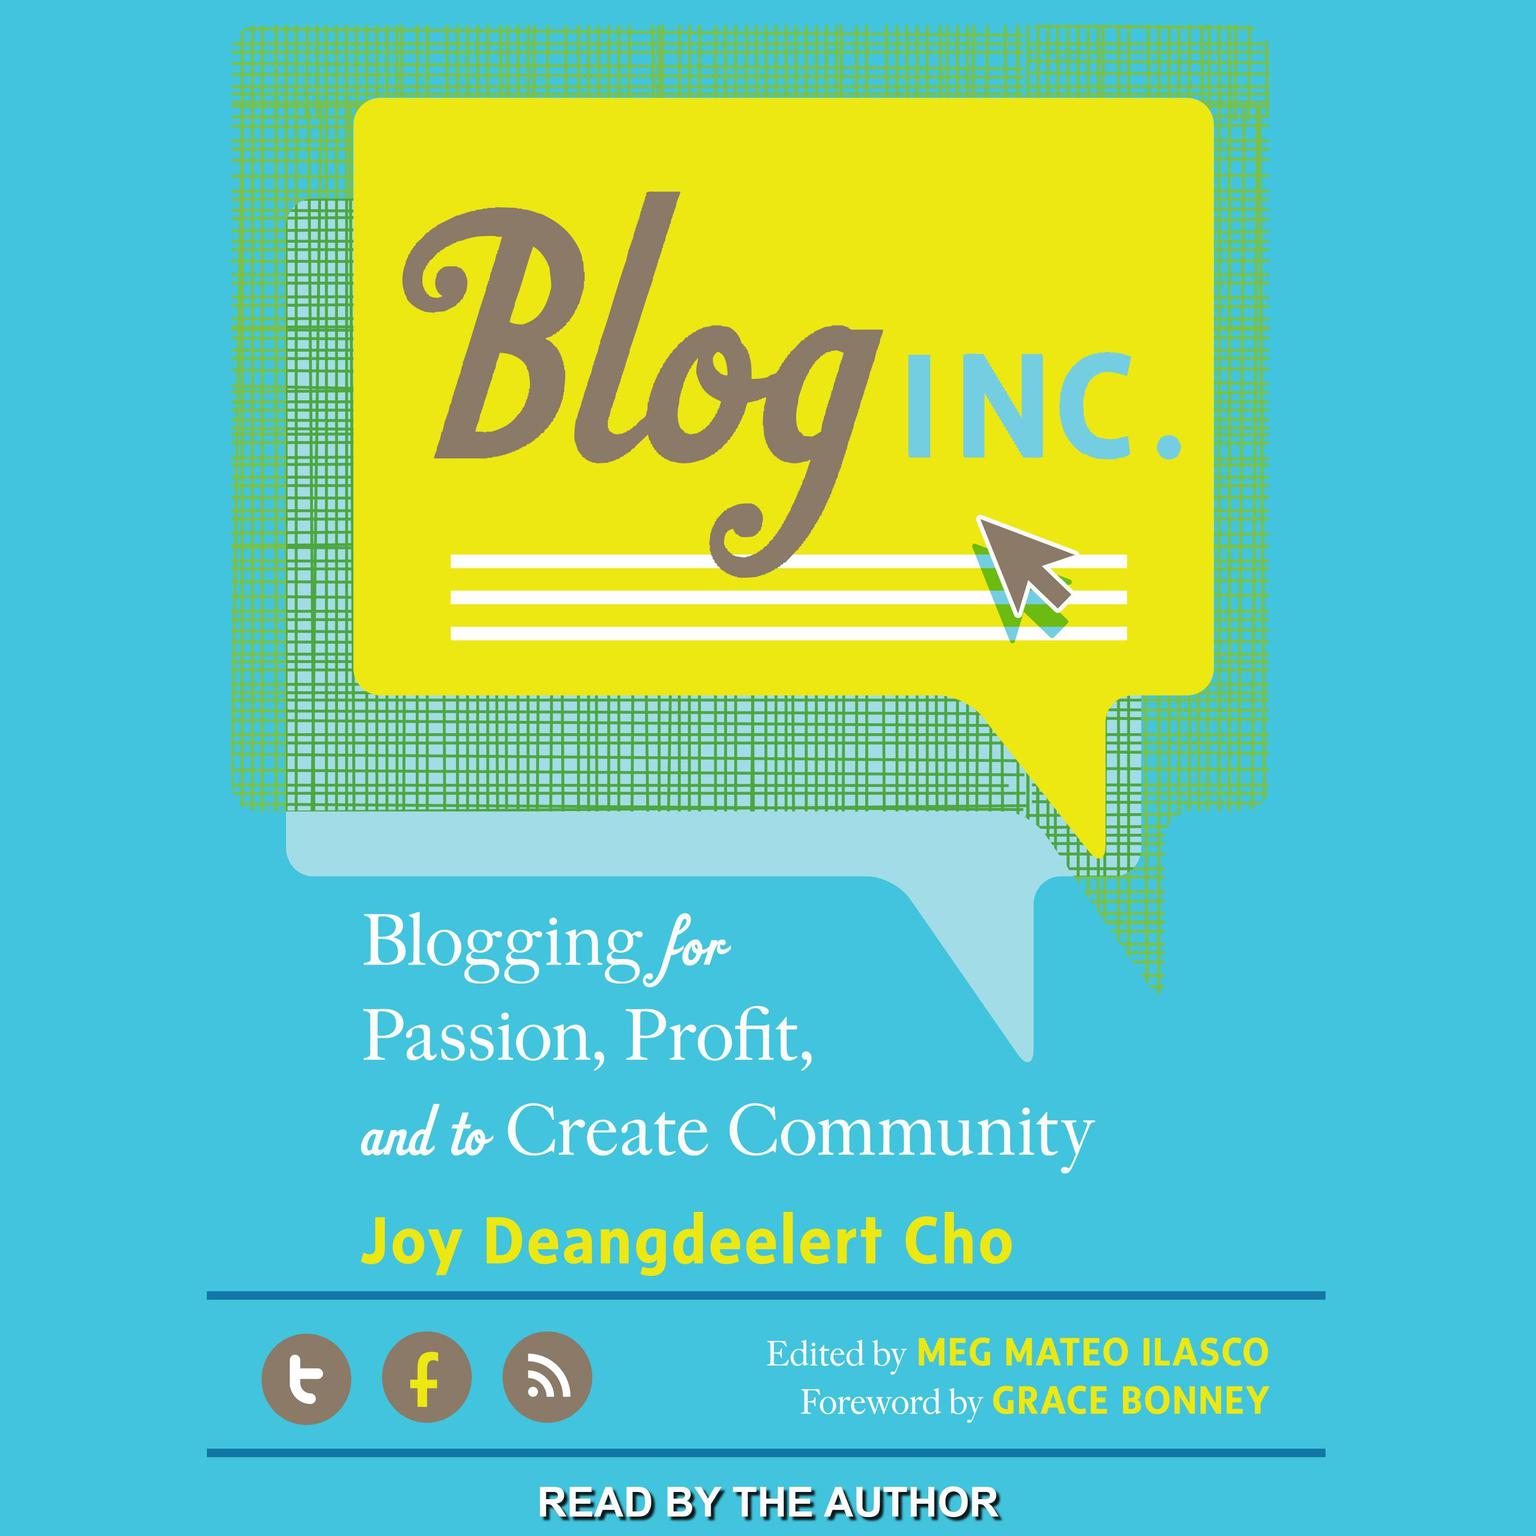 Blog, Inc.: Blogging for Passion, Profit, and to Create Community Audiobook, by Joy Deangdeelert Cho